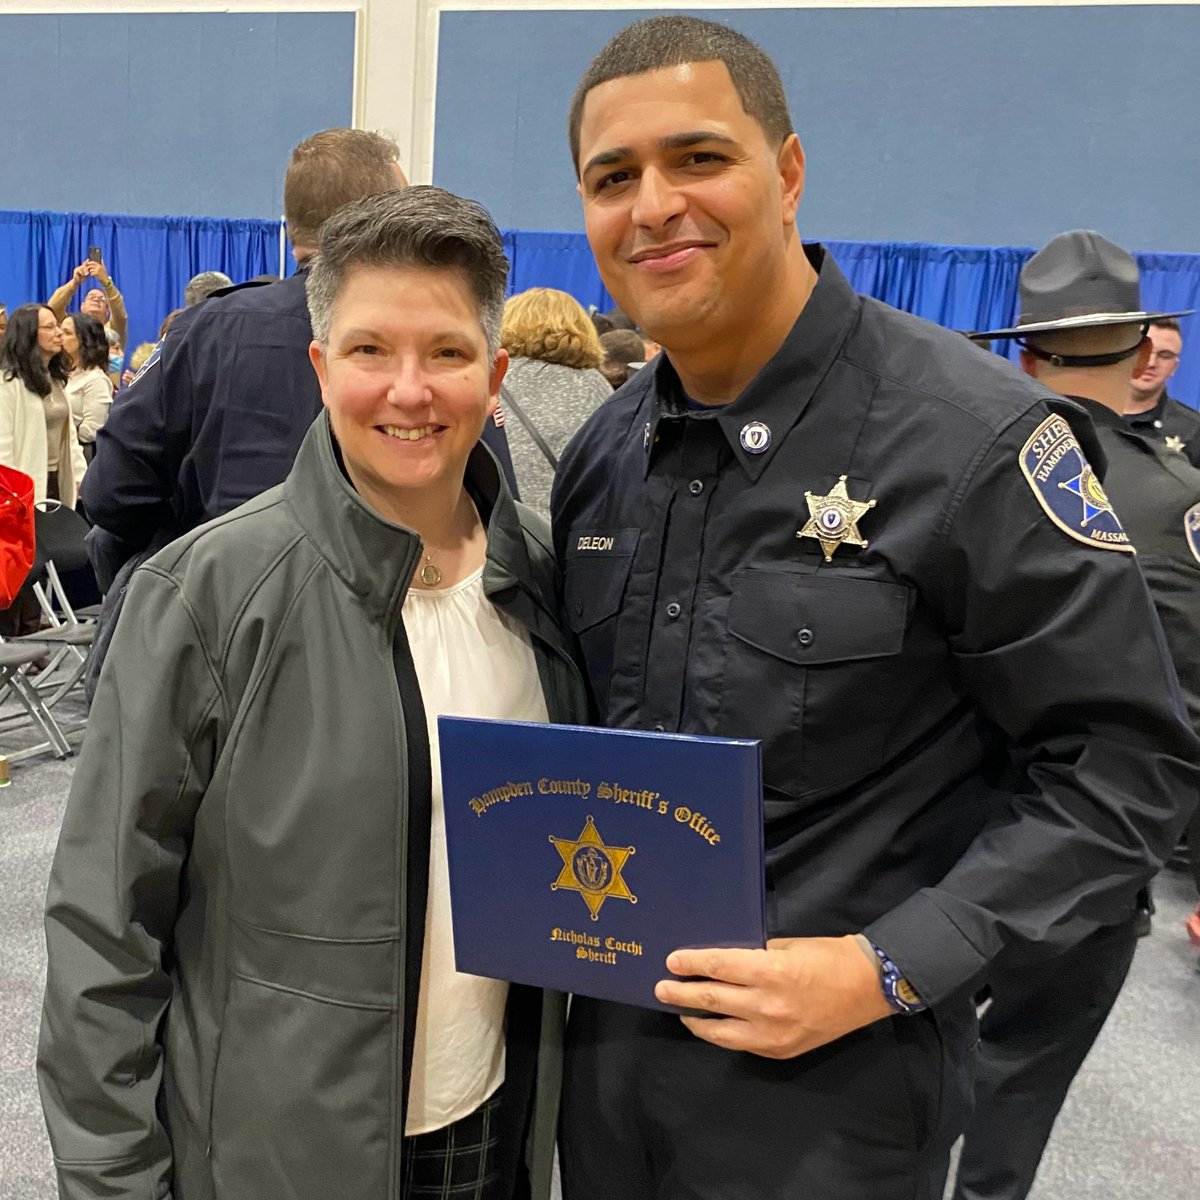 We are delighted to acknowledge Gary Deleon, a former participant of Roca Springfield, who graduated in 2014. He has now begun his career as a Correctional Officer. Our heartfelt congratulations go out to Gary! #rocainc #springfield #successstory #careerjourney #massachusetts